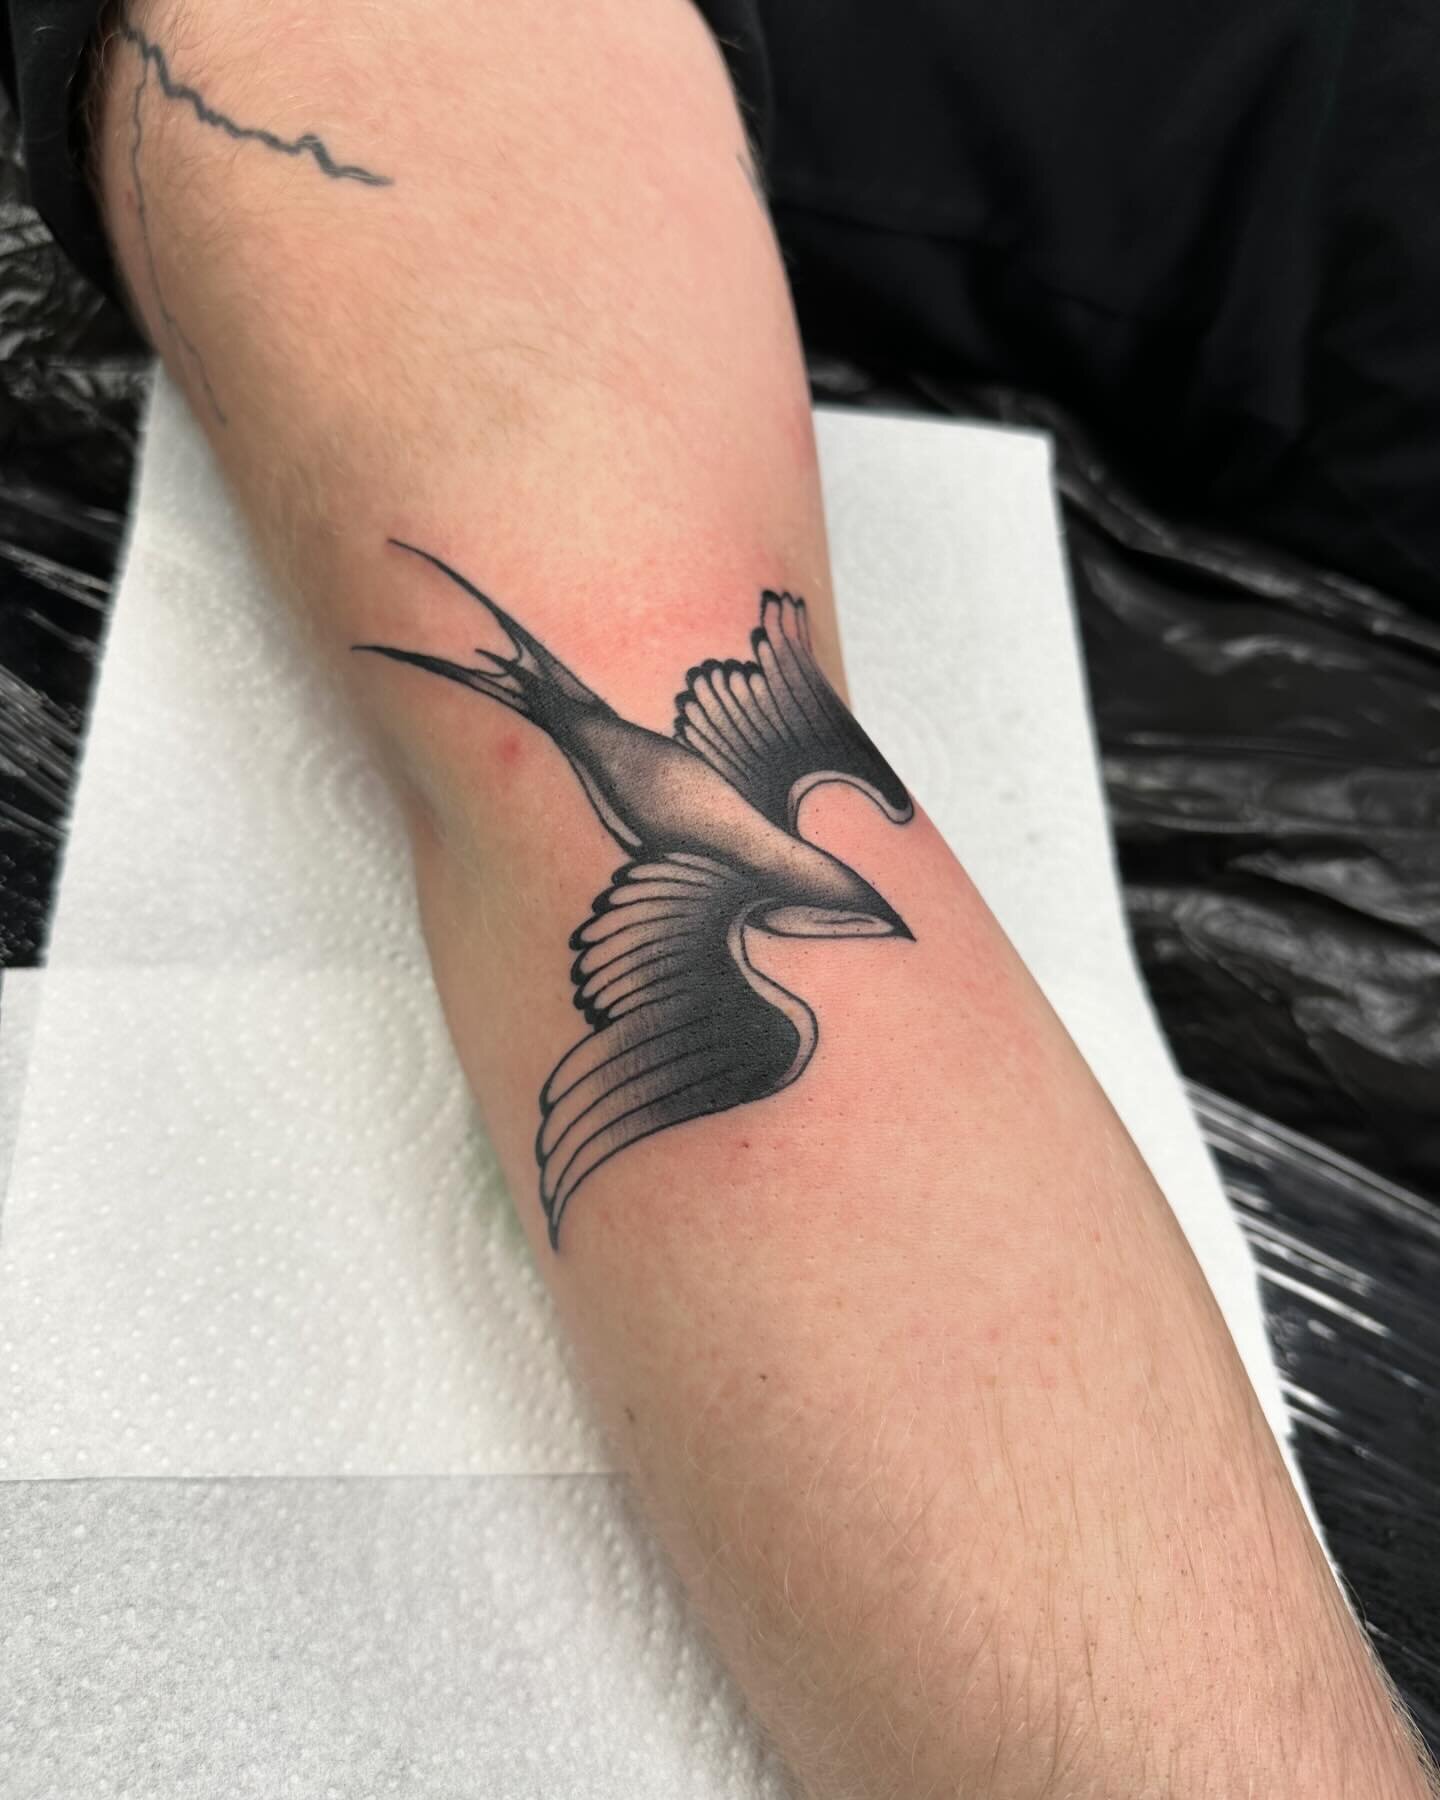 ❤️SWALLOW❤️

Thx Maxfor the Trust❤️❤️
With Love Chelly❤️
My books are open!!
Dm me if your interested 
Find me @noble_tattoo

.
.
.
.
.
.
.
.
.
.
.
.
.
.
.
.
.
.
.
.
.
.
.
.
.
.
.
.
.
.
.
.
.
.
.
.
#tattoo #traditionaltattoo #customtattoo #traditiona